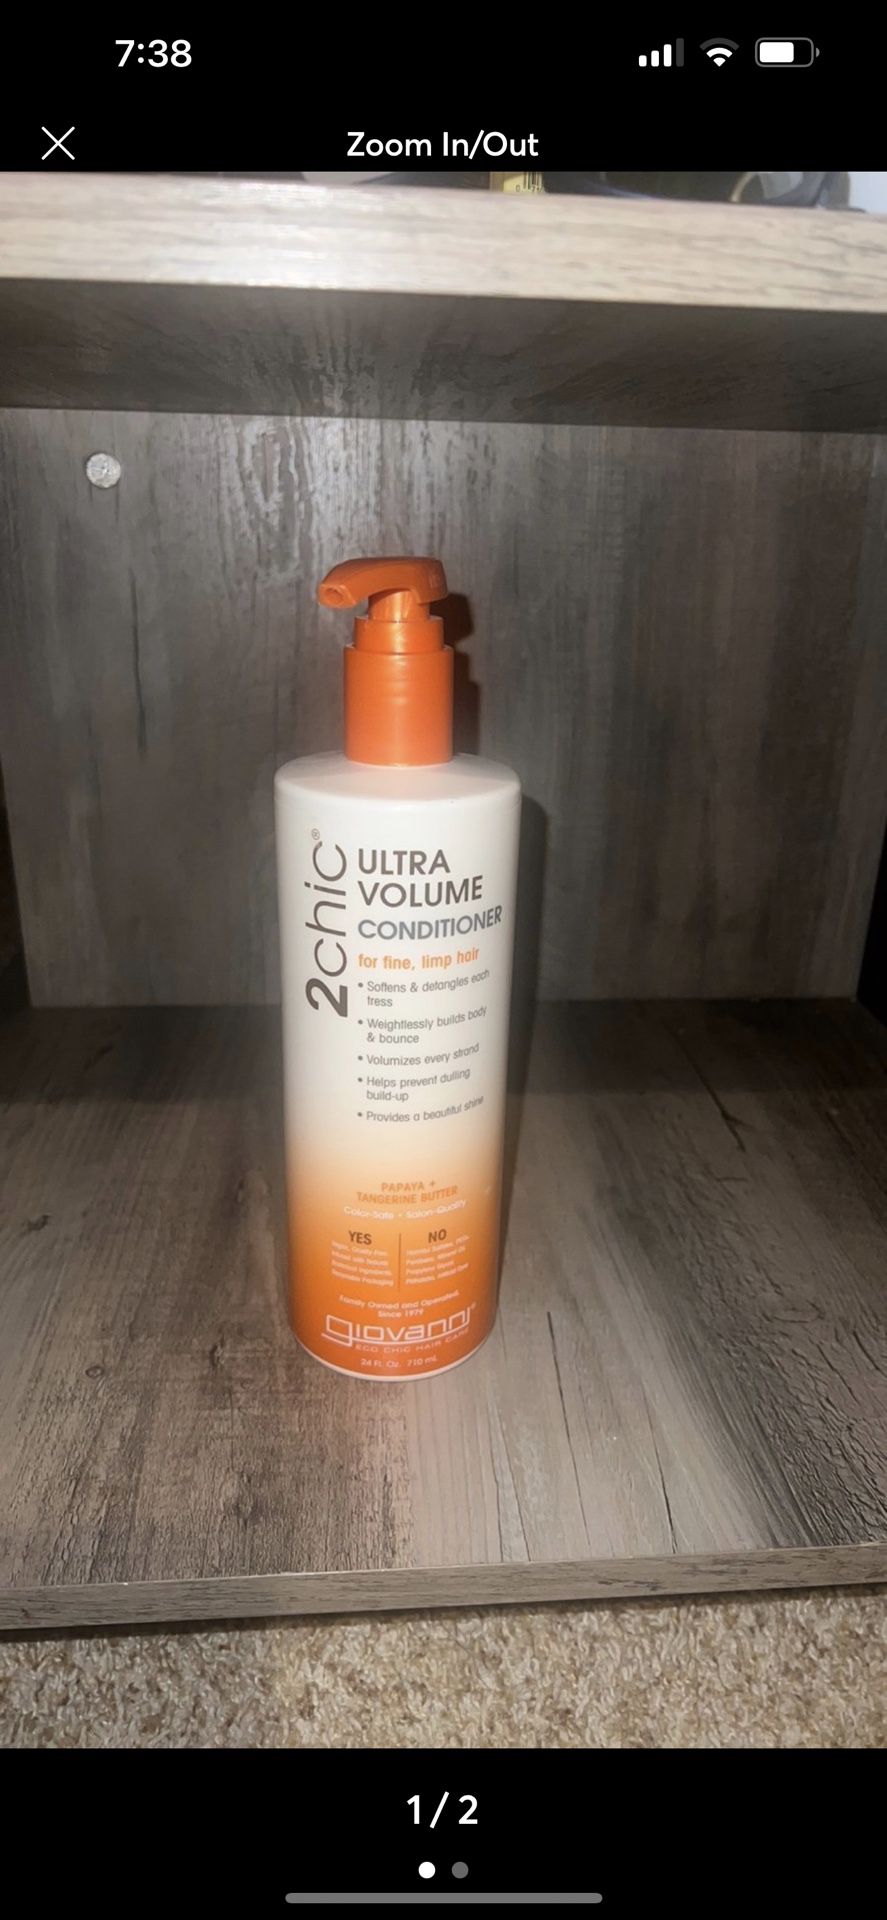 GIOVANNI 2chic Ultra-Volume Conditioner - Daily Volumizing Formula with Papaya & Tangerine Butter, Promotes Weightless Control for Fine Limp Thin Hair